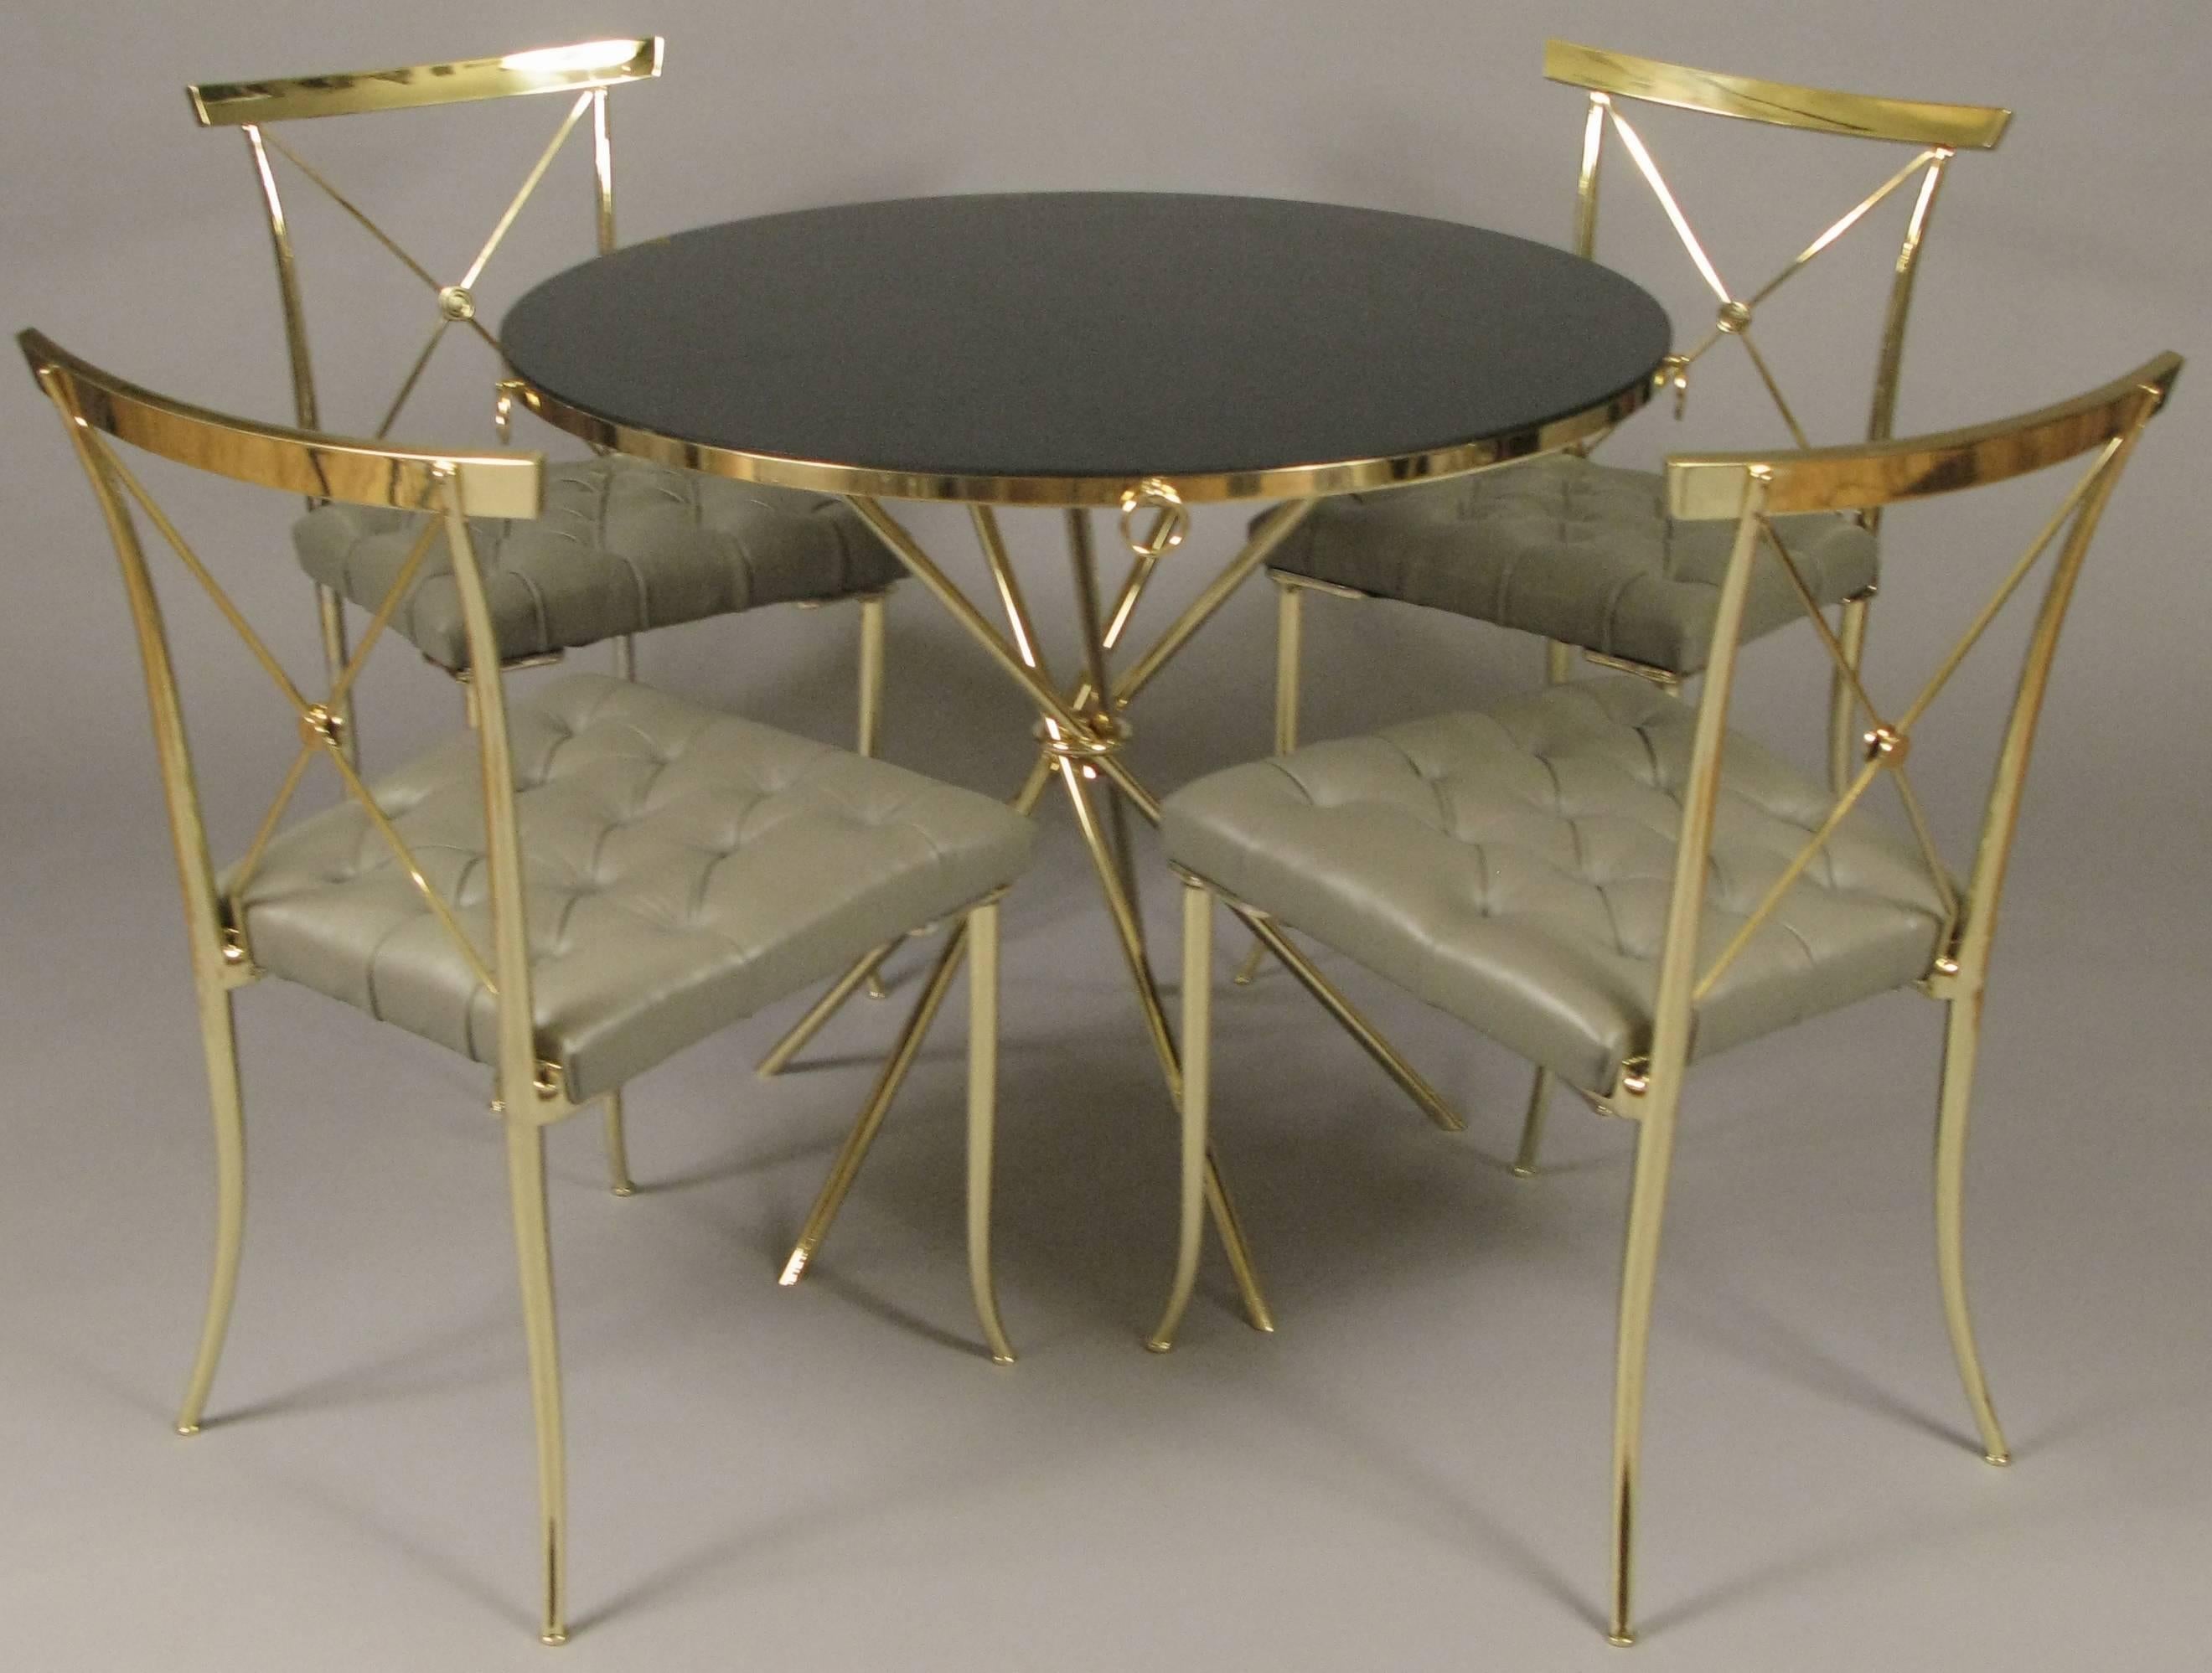 A stunning vintage 1950s brass dining set in the style of William 'Billy' Haines. The set includes four brass frame chairs with X-back with center medallion. The seats have just been reupholstered with the original pattern of deep button tufting in